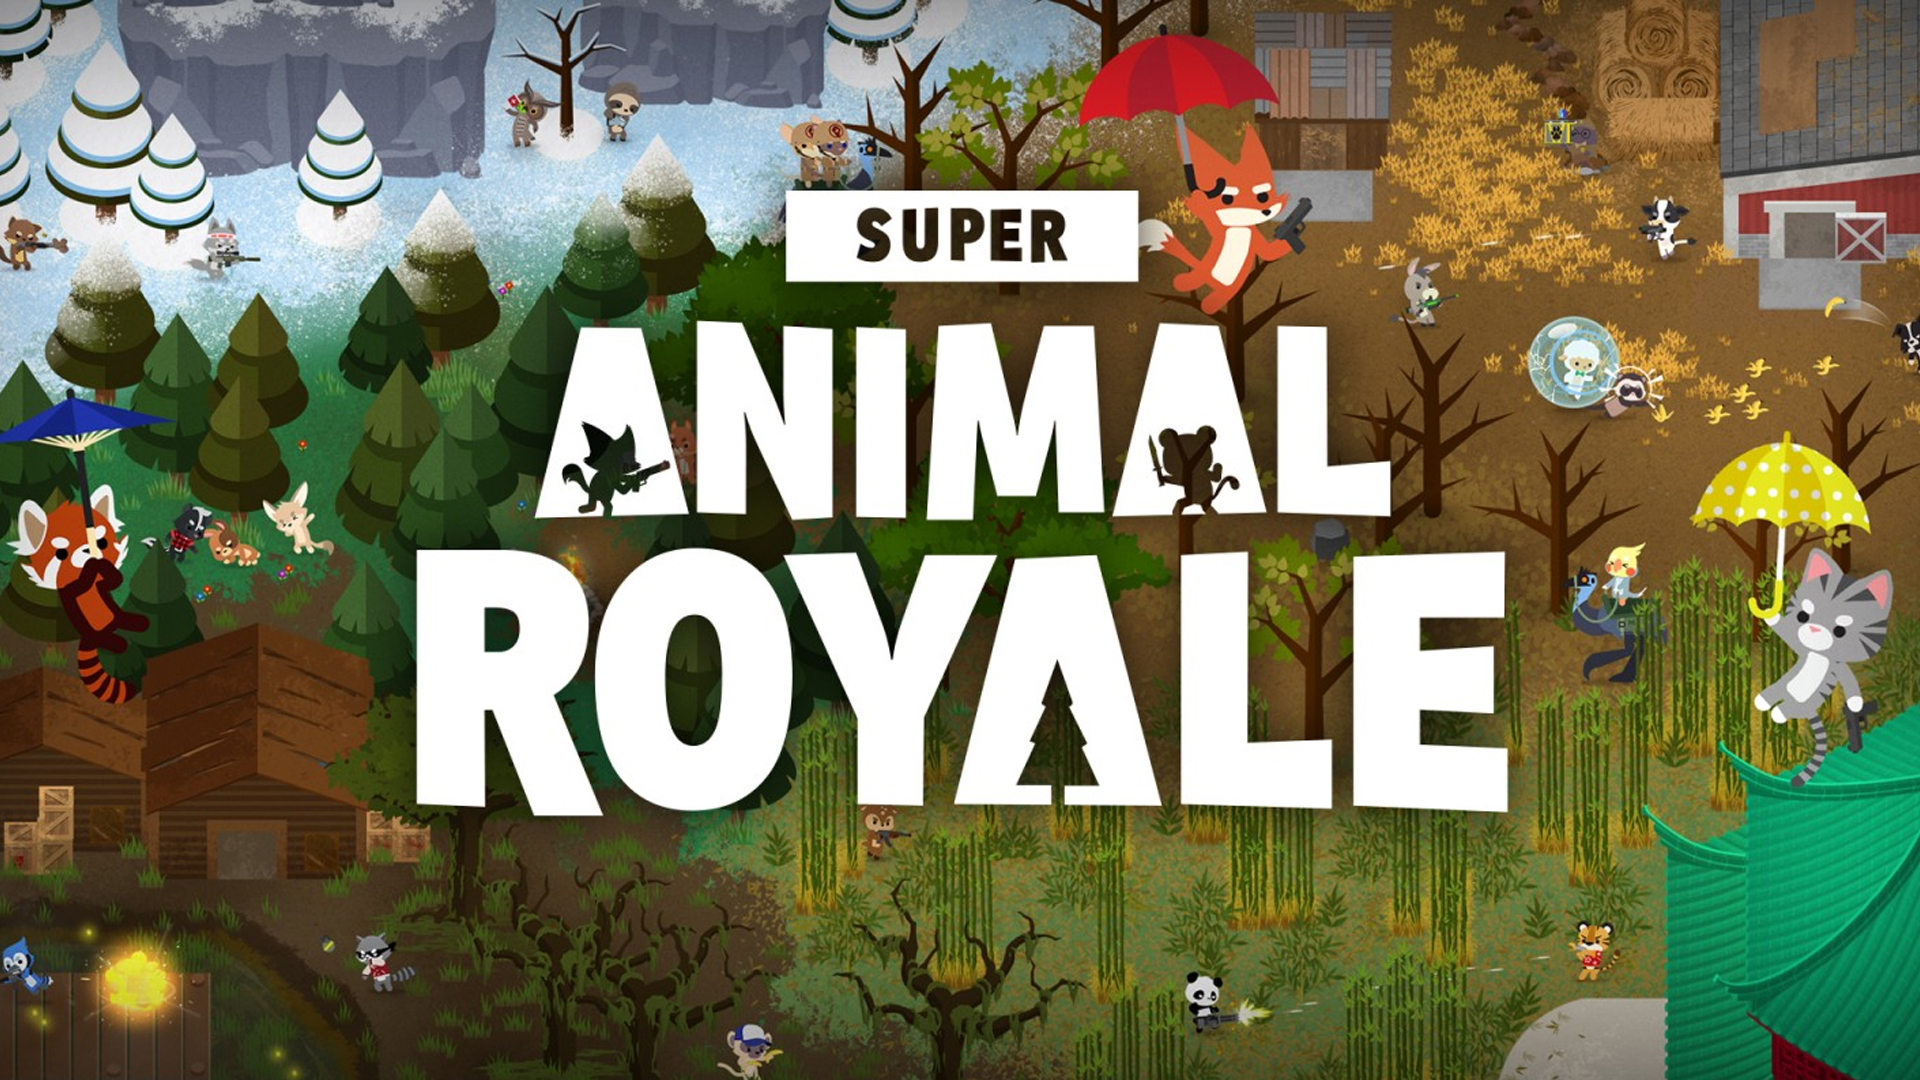 All Animal Royale codes to redeem Hats, Umbrellas & more